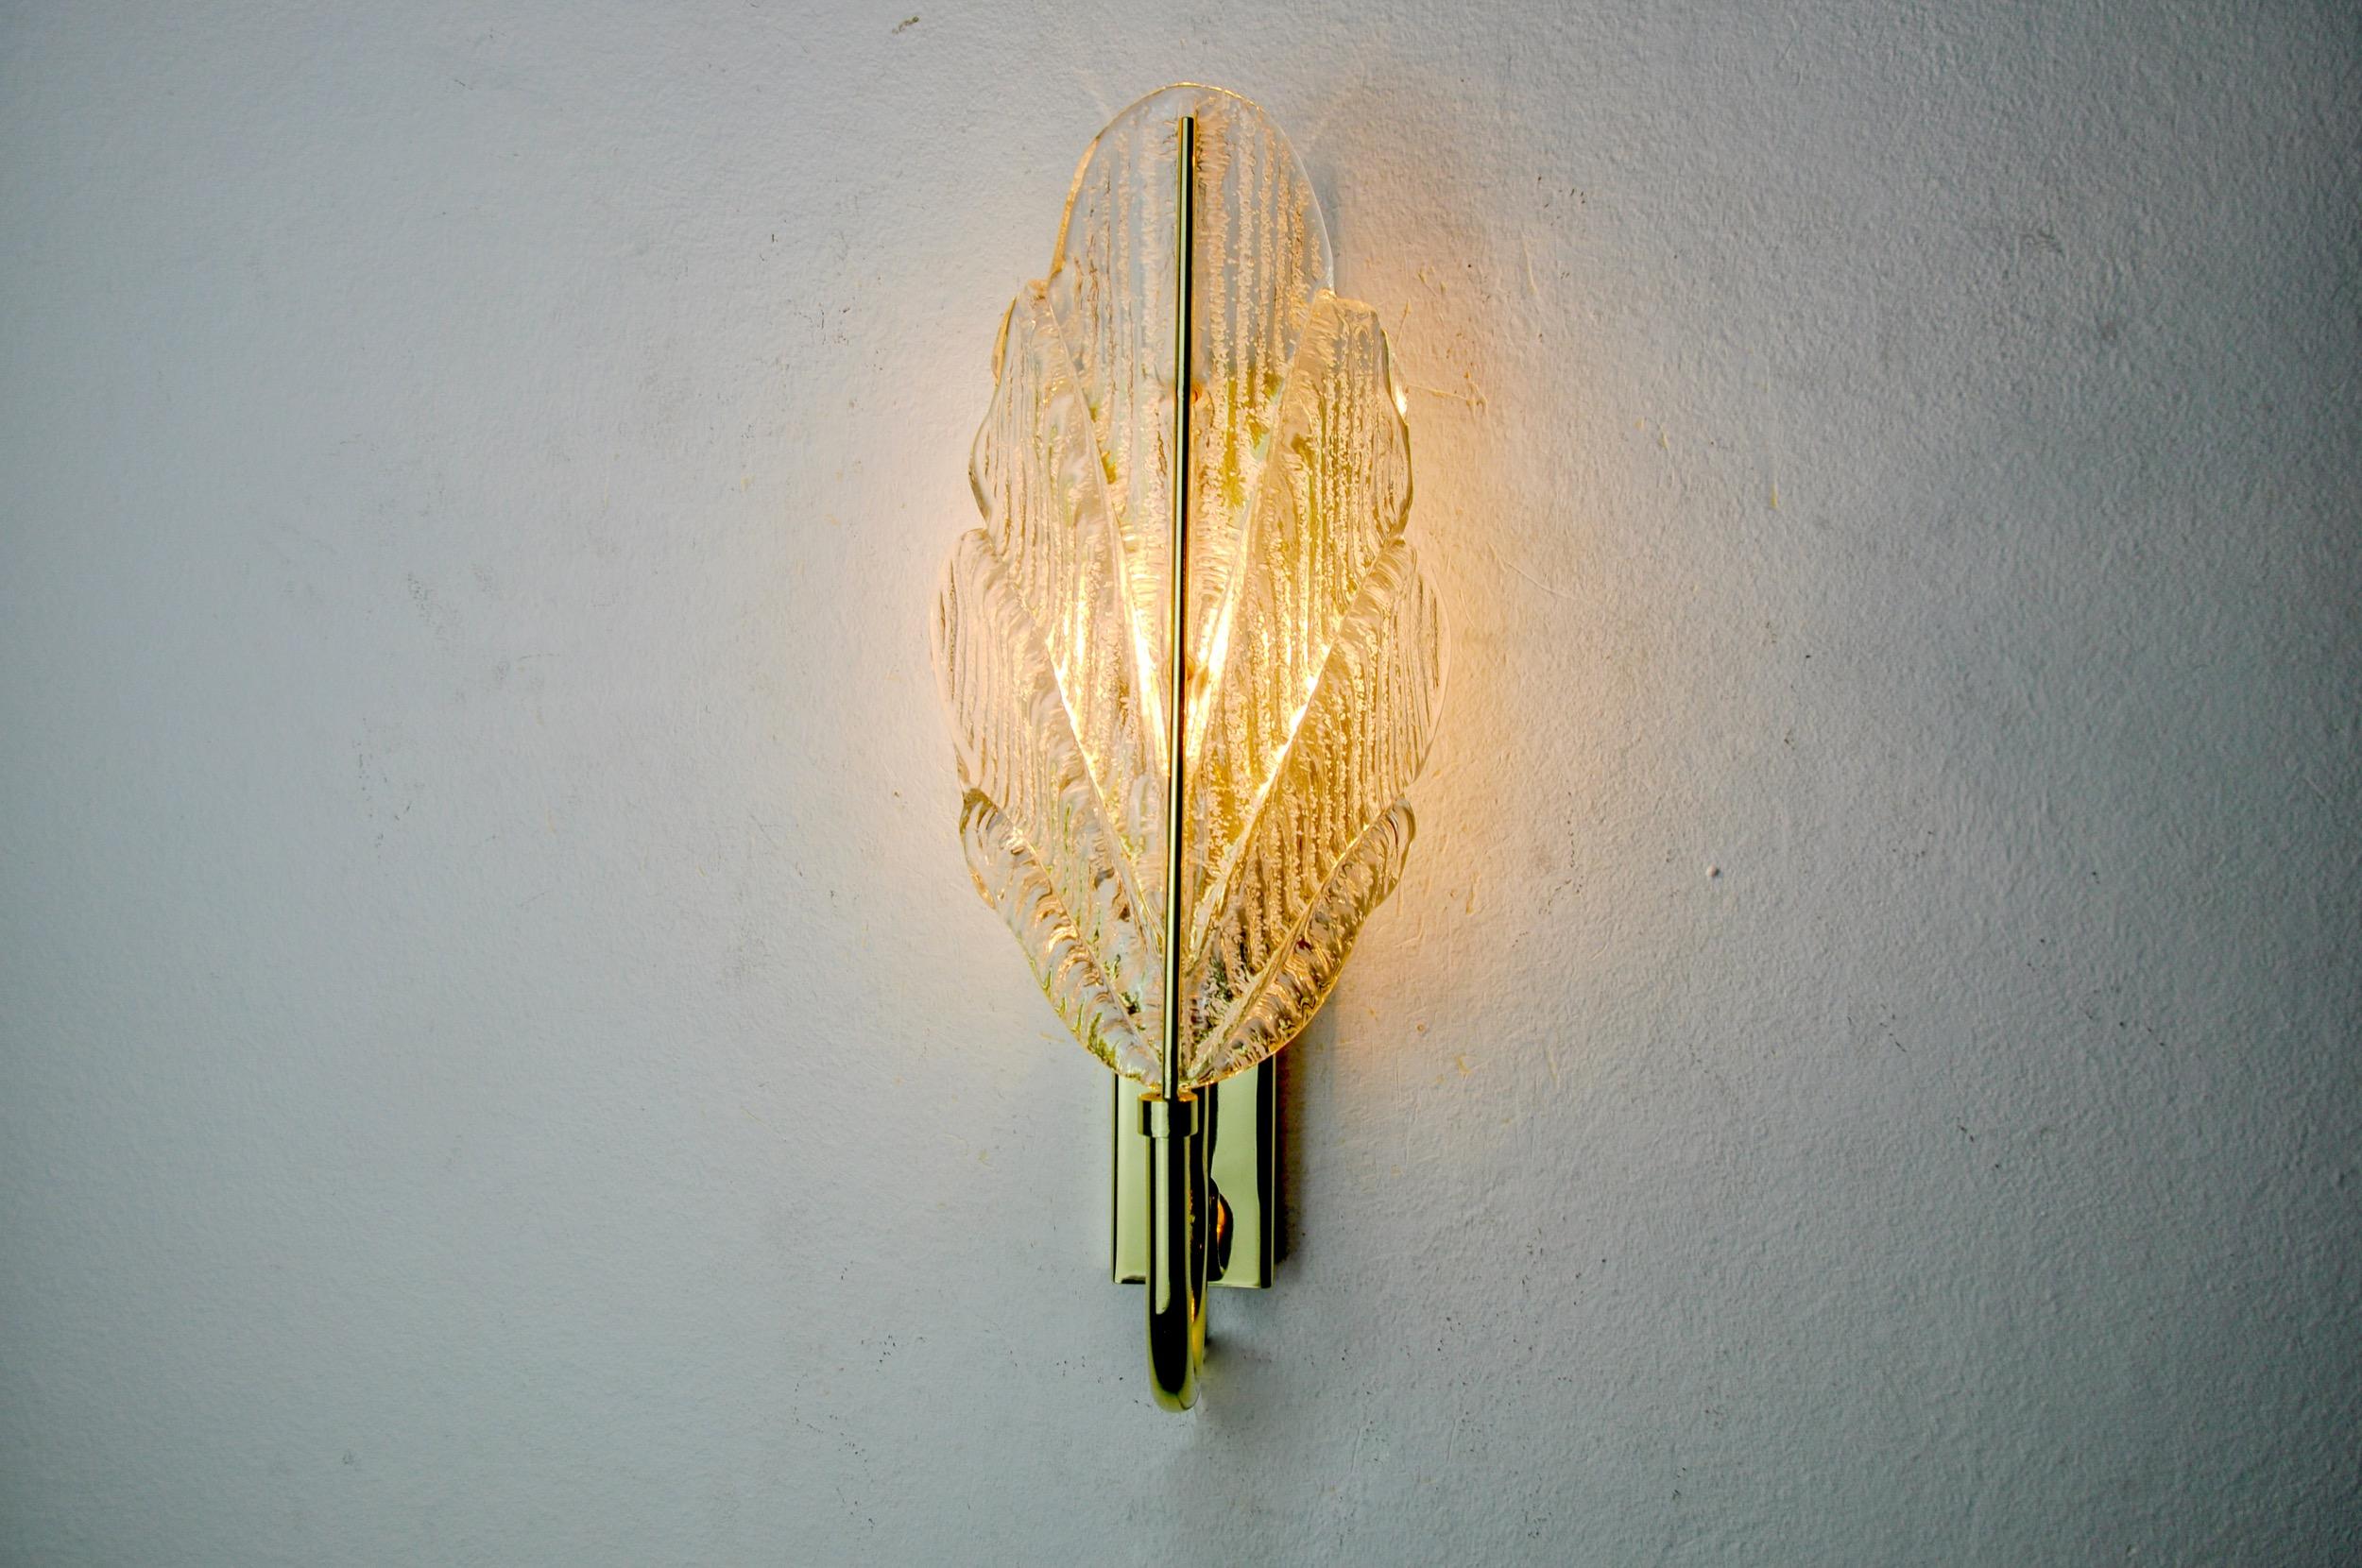 Very beautiful wall lamp designated and produced in italy in the 70s. Frosted murano glass crystal representing a gilded metal leaf and structure. Unique object that will illuminate wonderfully and bring a real design touch to your interior.